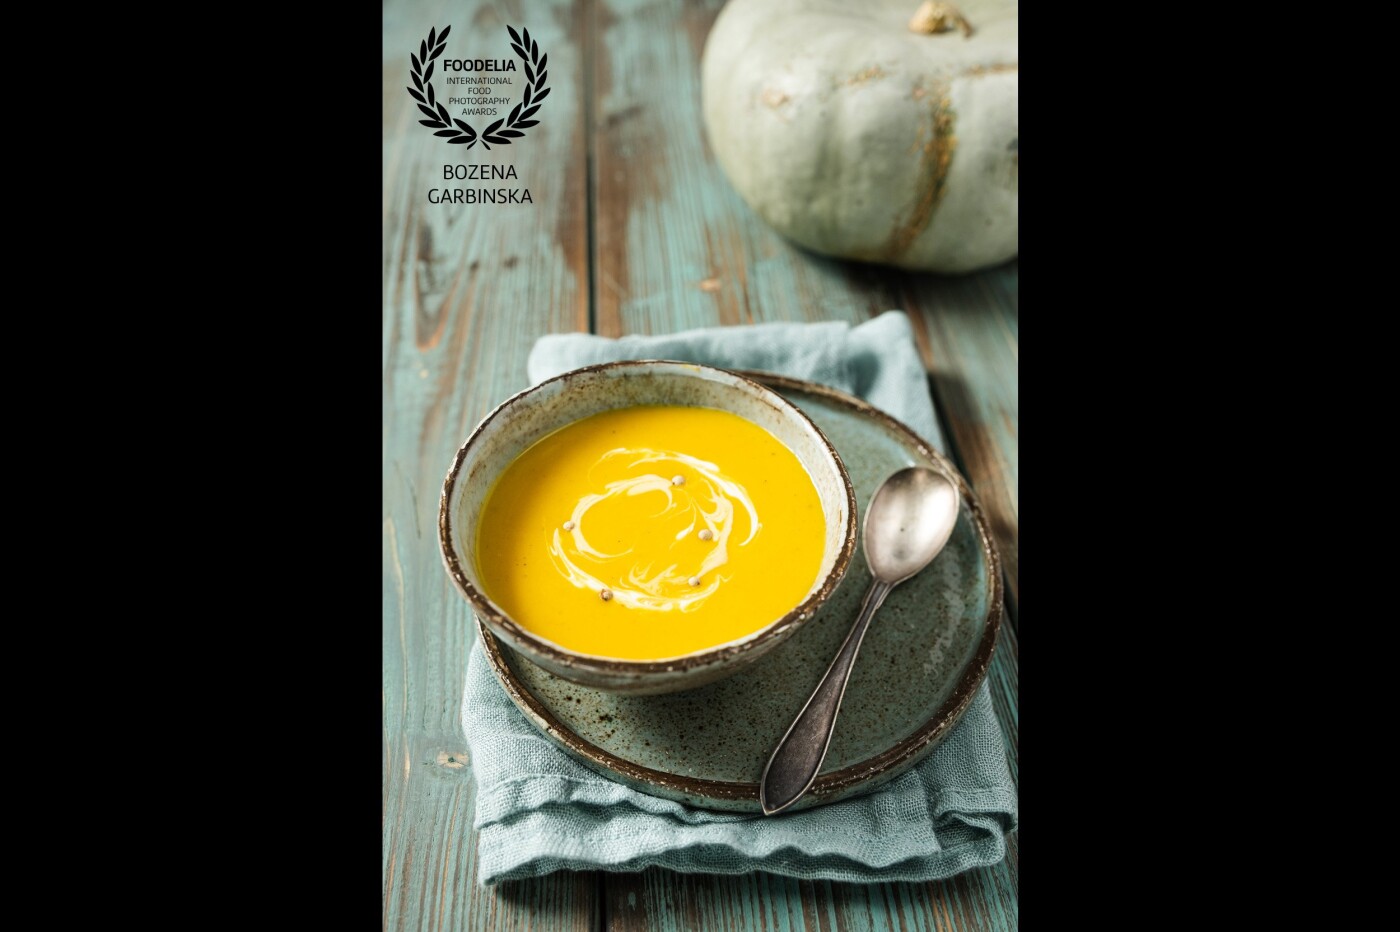 Pumpkin soup - autumn is the best time for warming soups, like this one with pumpkin.<br />
Camera: Fuji X-T3<br />
Lens: Fujinon 16-55 F2.8